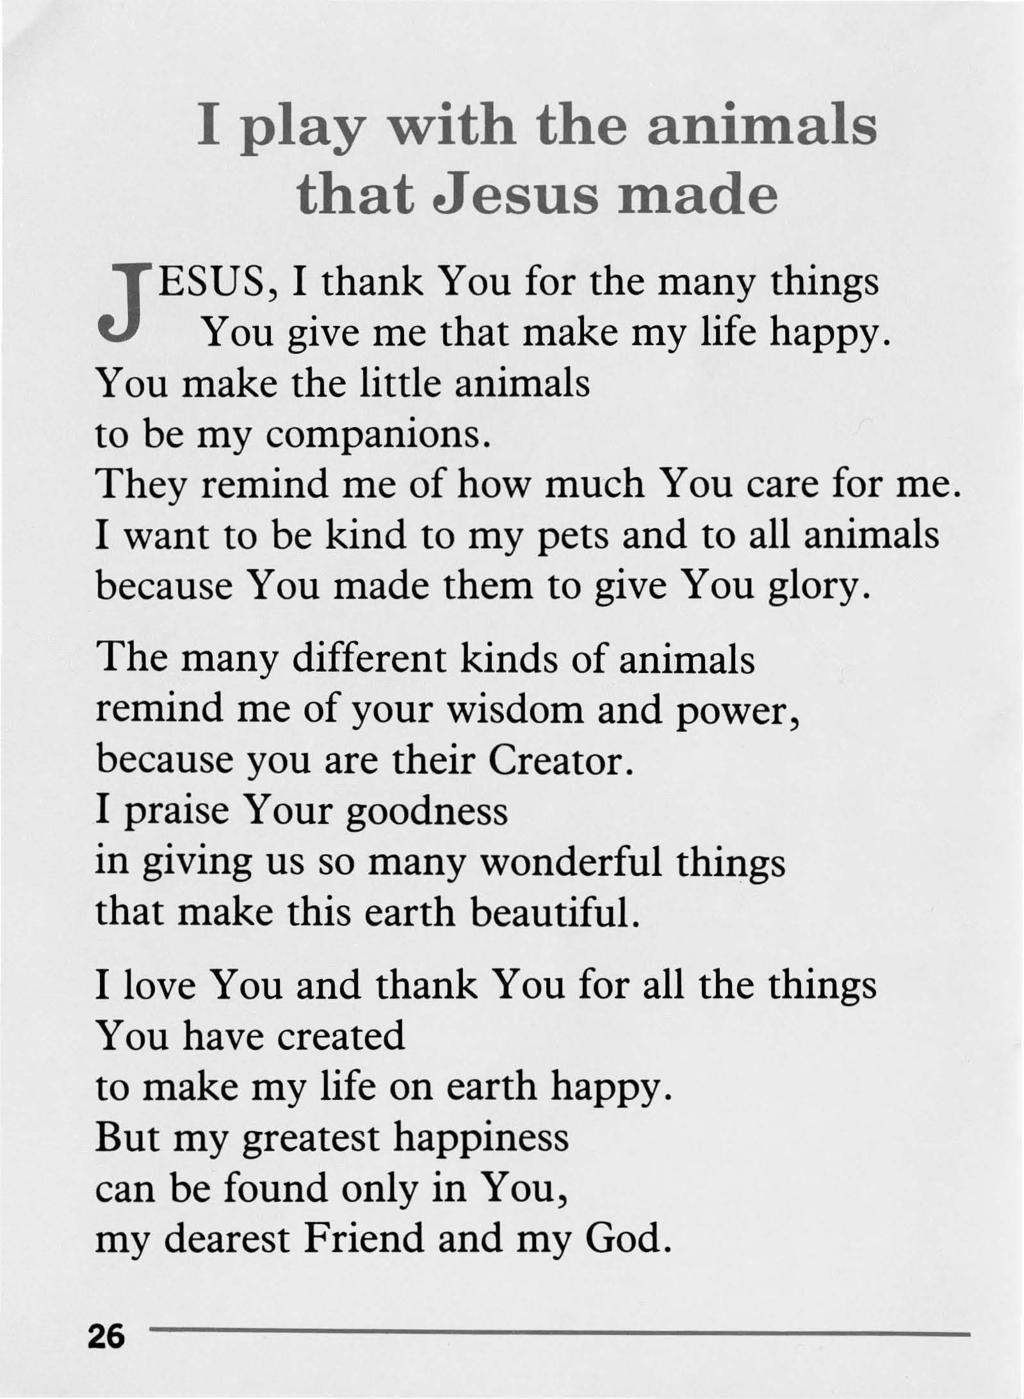 I play with the animals that Jesus made JESUS, I thank You for the many things You give me that make my life happy. You make the little animals to be my companions.